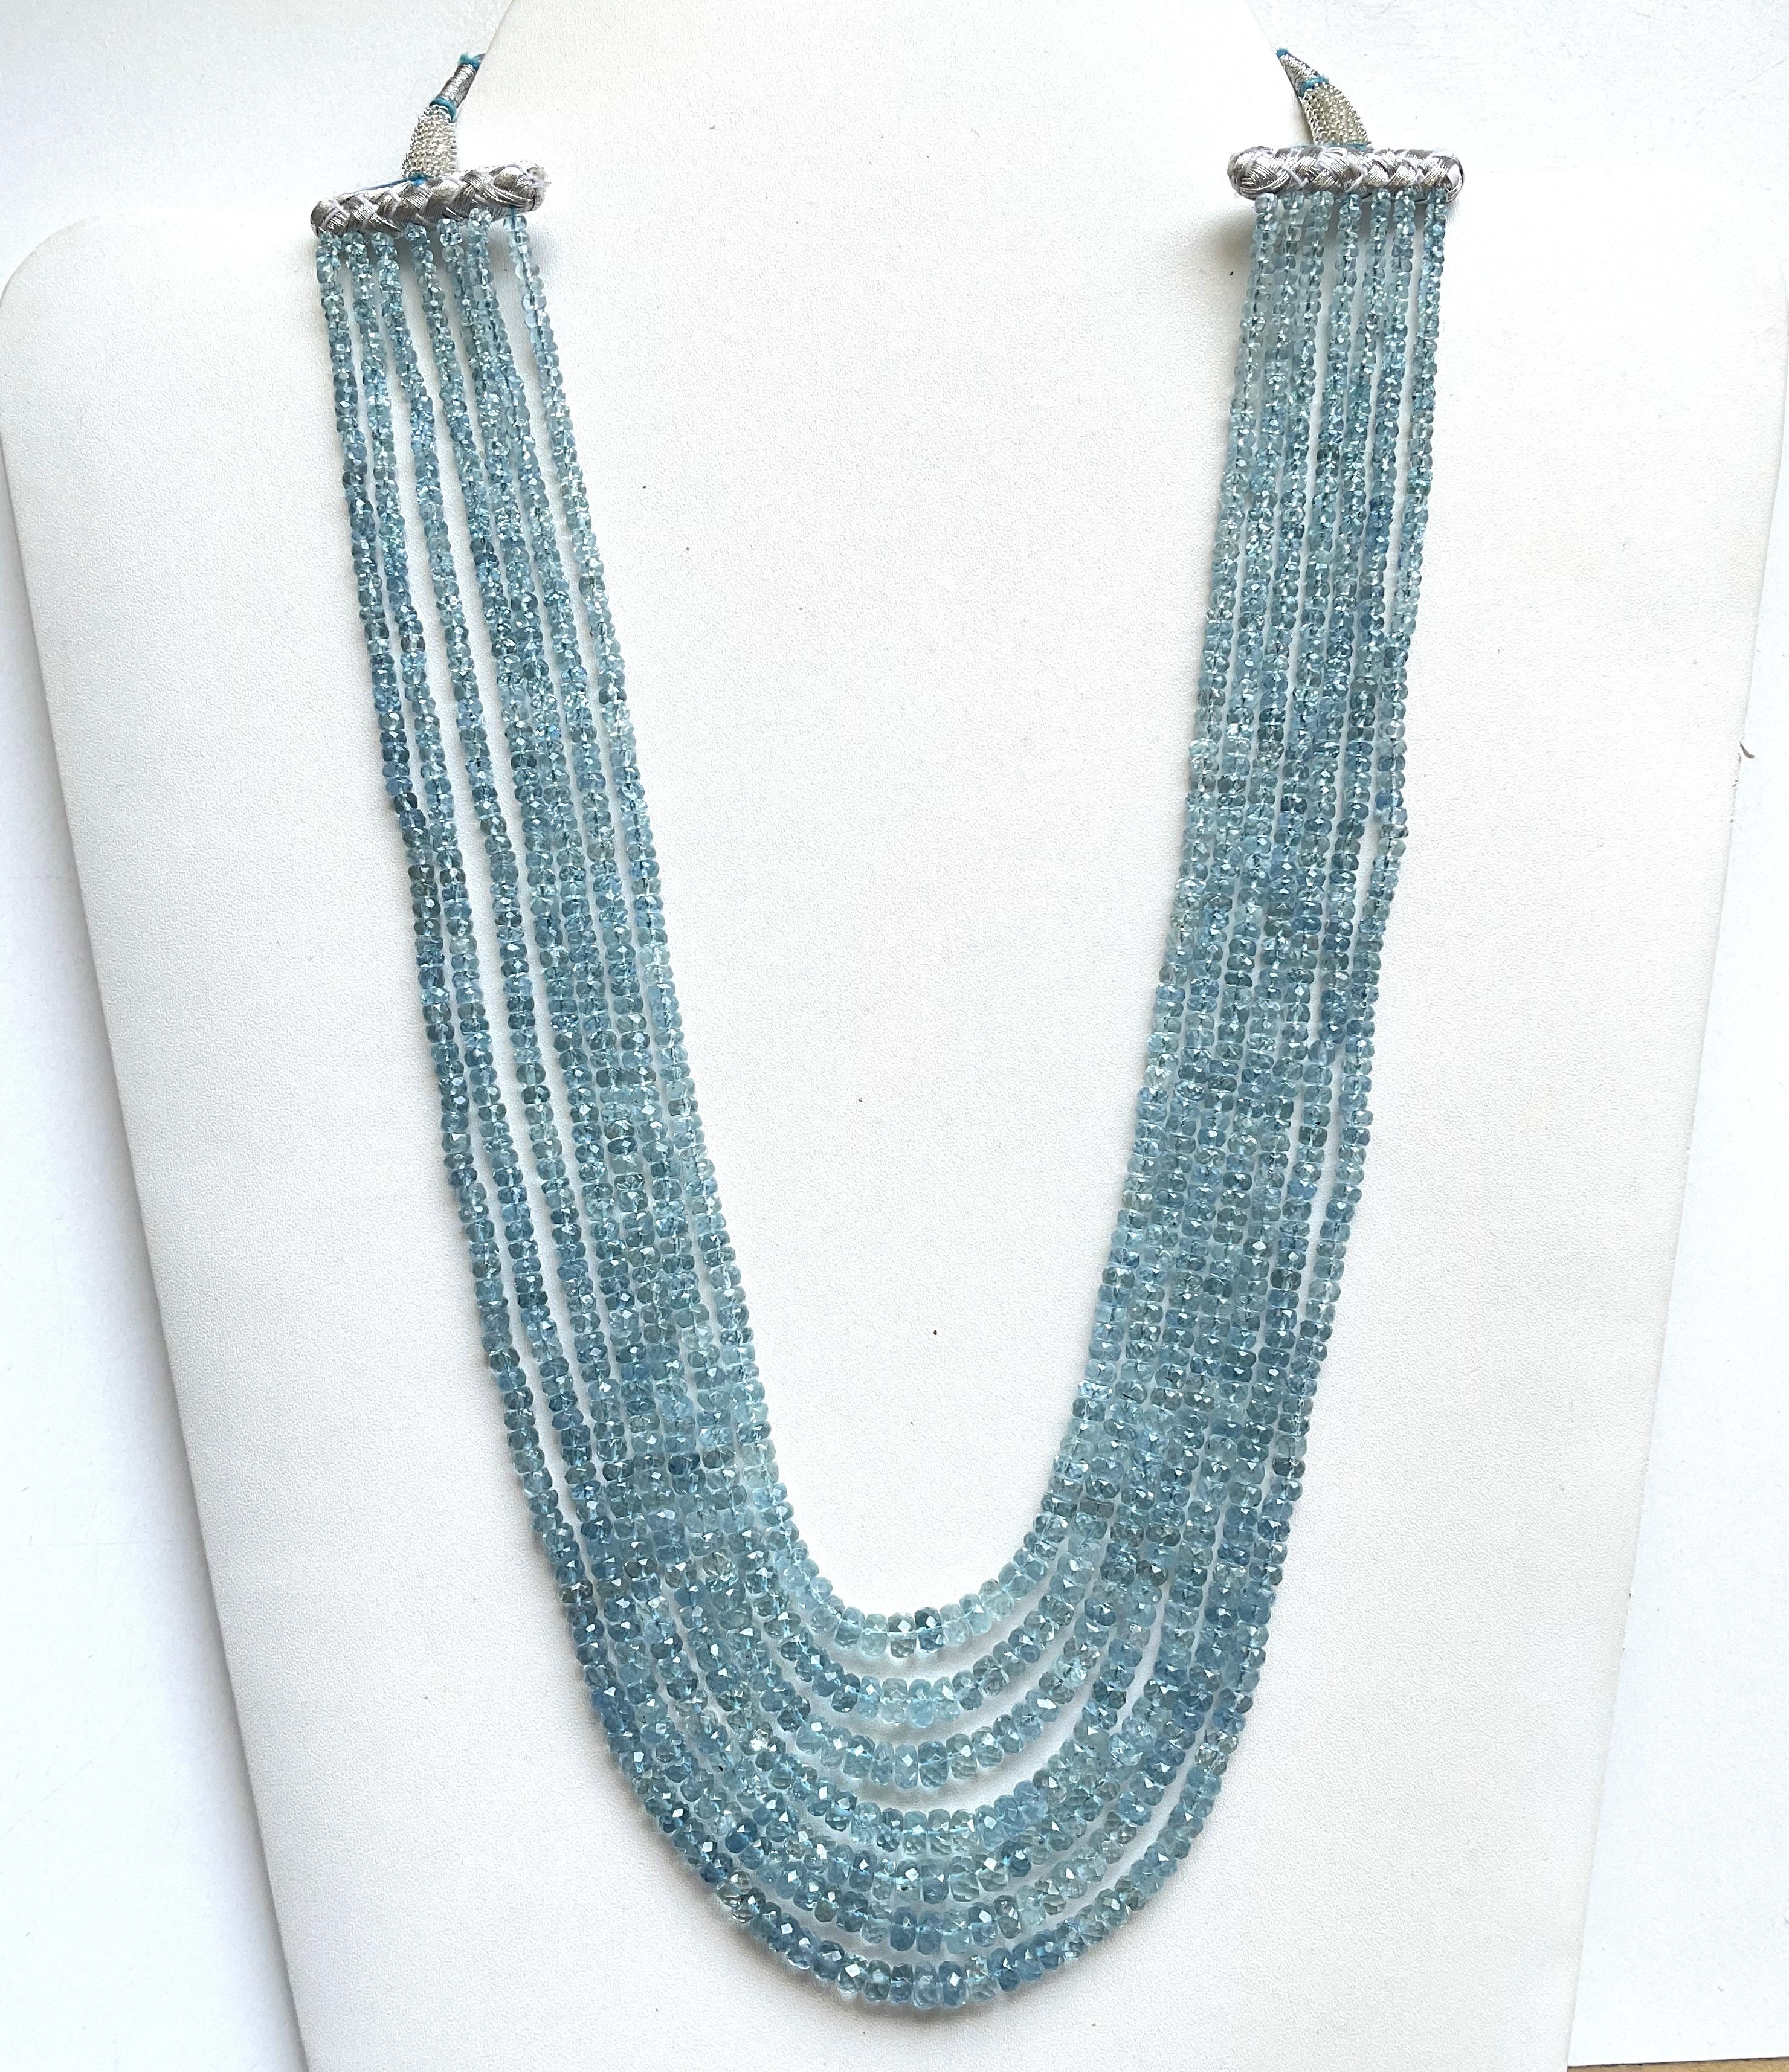 445.90 carats Aquamarine Beaded Necklace 7 Strand Faceted Beads good Quality Gem

gemstone - Aquamarine 
weight - 445.90 carats
size - 3 To 6 mm
quantity - 7 Strand
Length : 20 Inch.